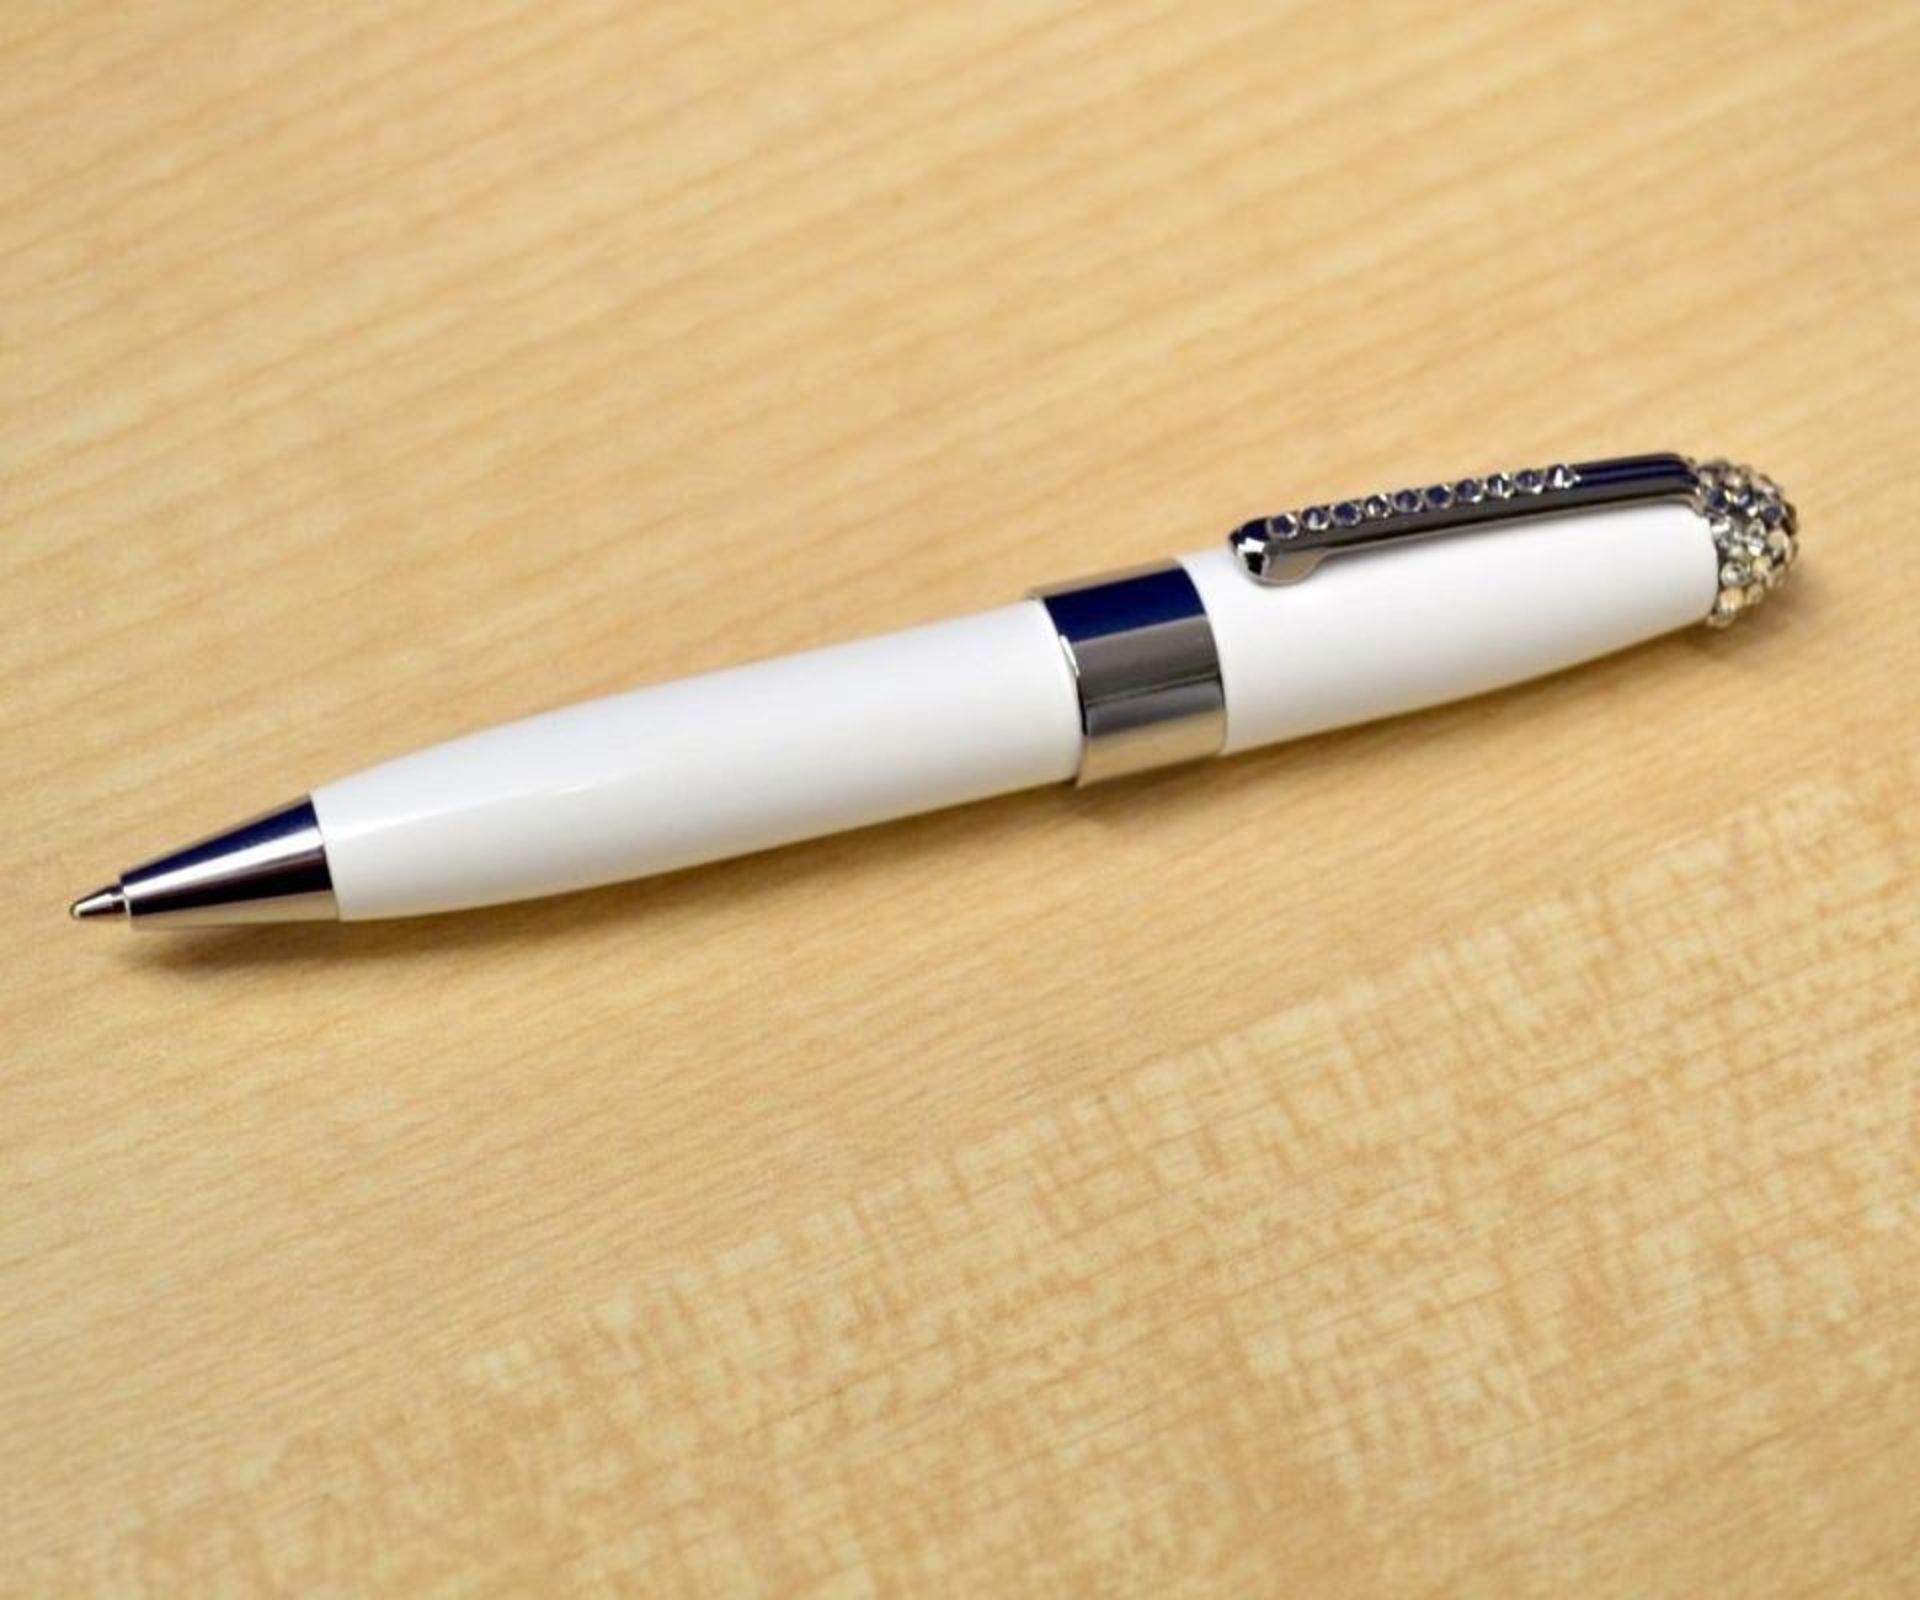 1 x ICE LONDON "Duchess" Ladies Pen Embellished With SWAROVSKI Crystals - Colour: White - Brand - Image 3 of 3